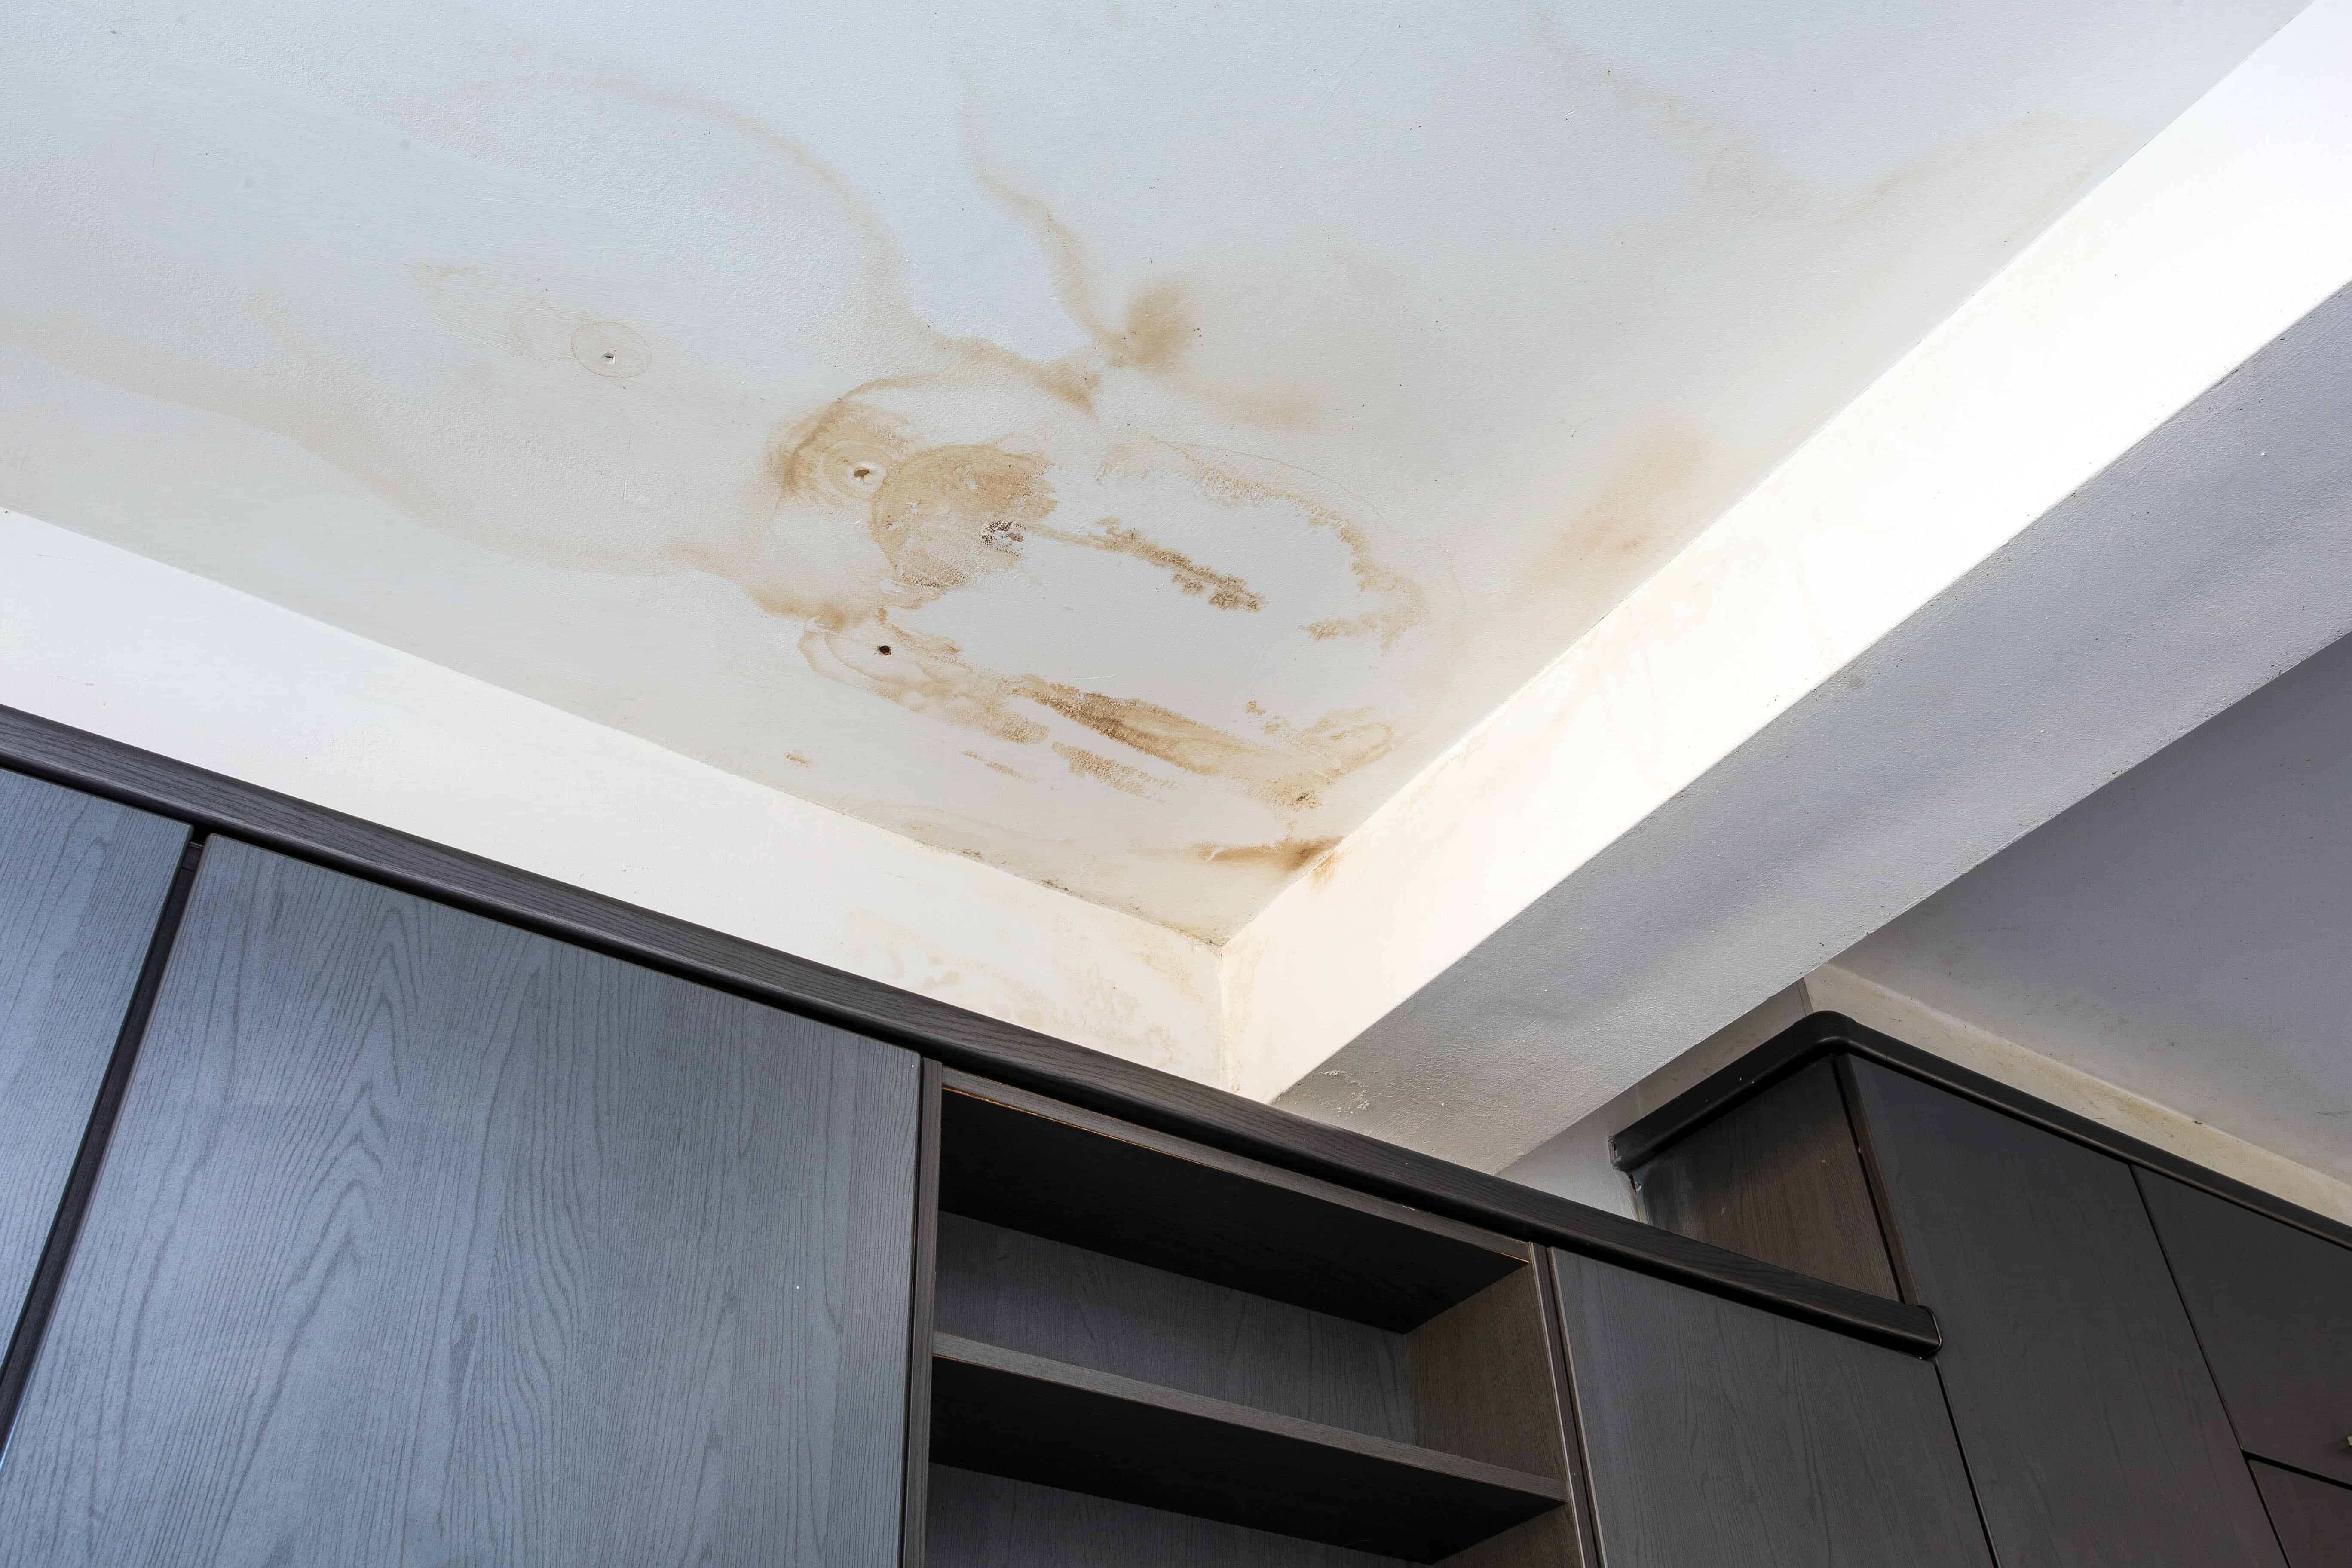 ceiling water damage in a corona home